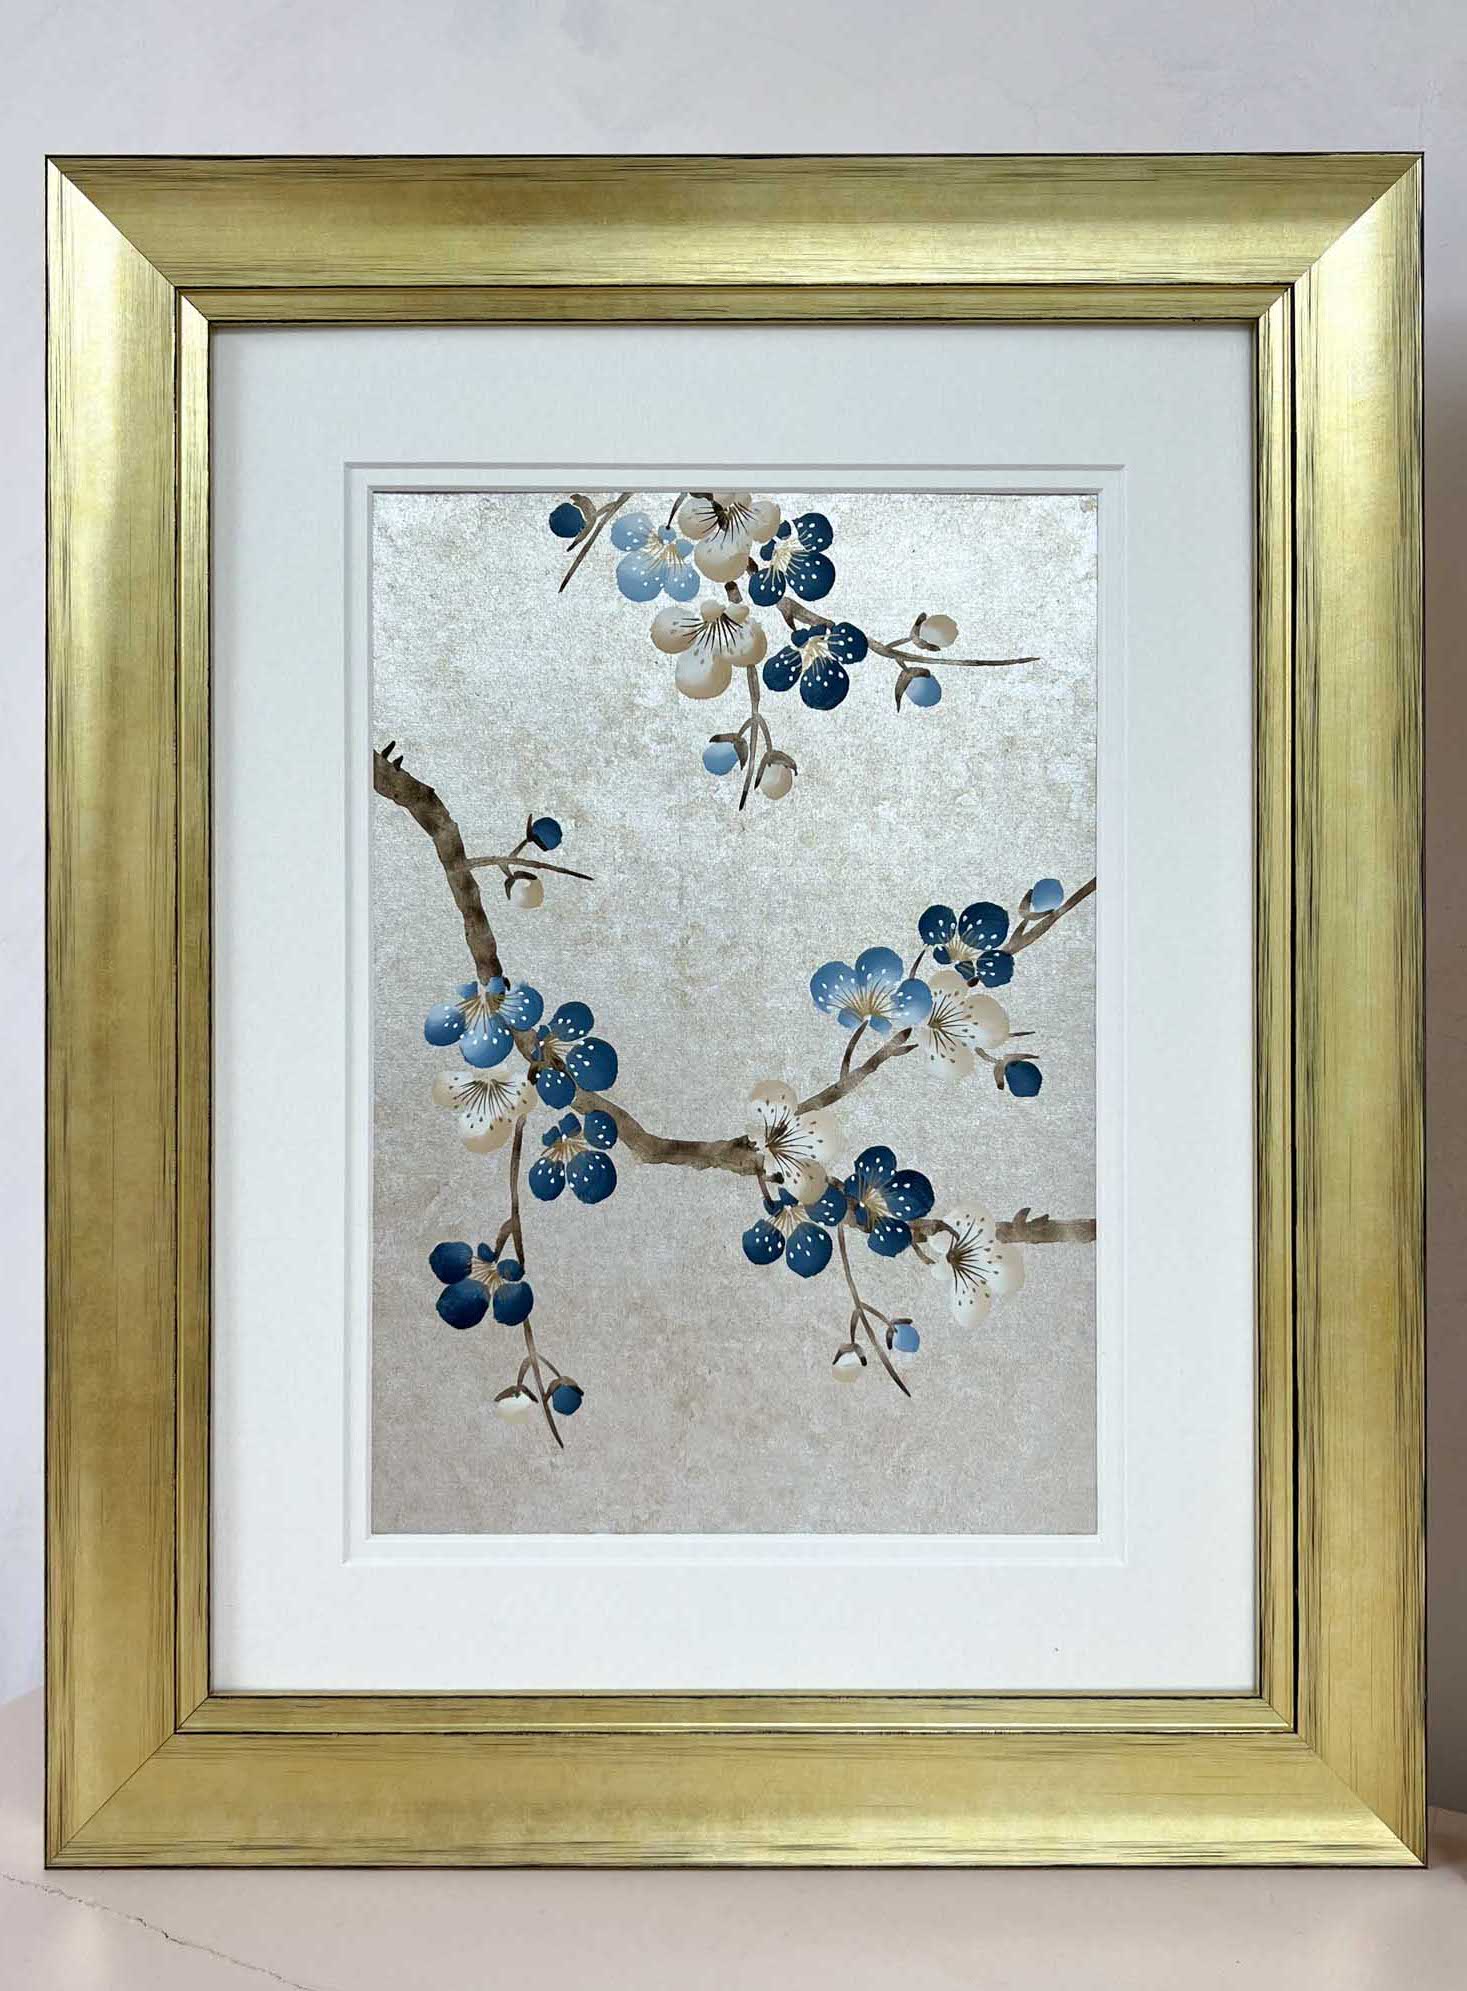 gold framed chinoiserie blossom flower painting by Diane Hill on a silver foil background with blue and white flowers